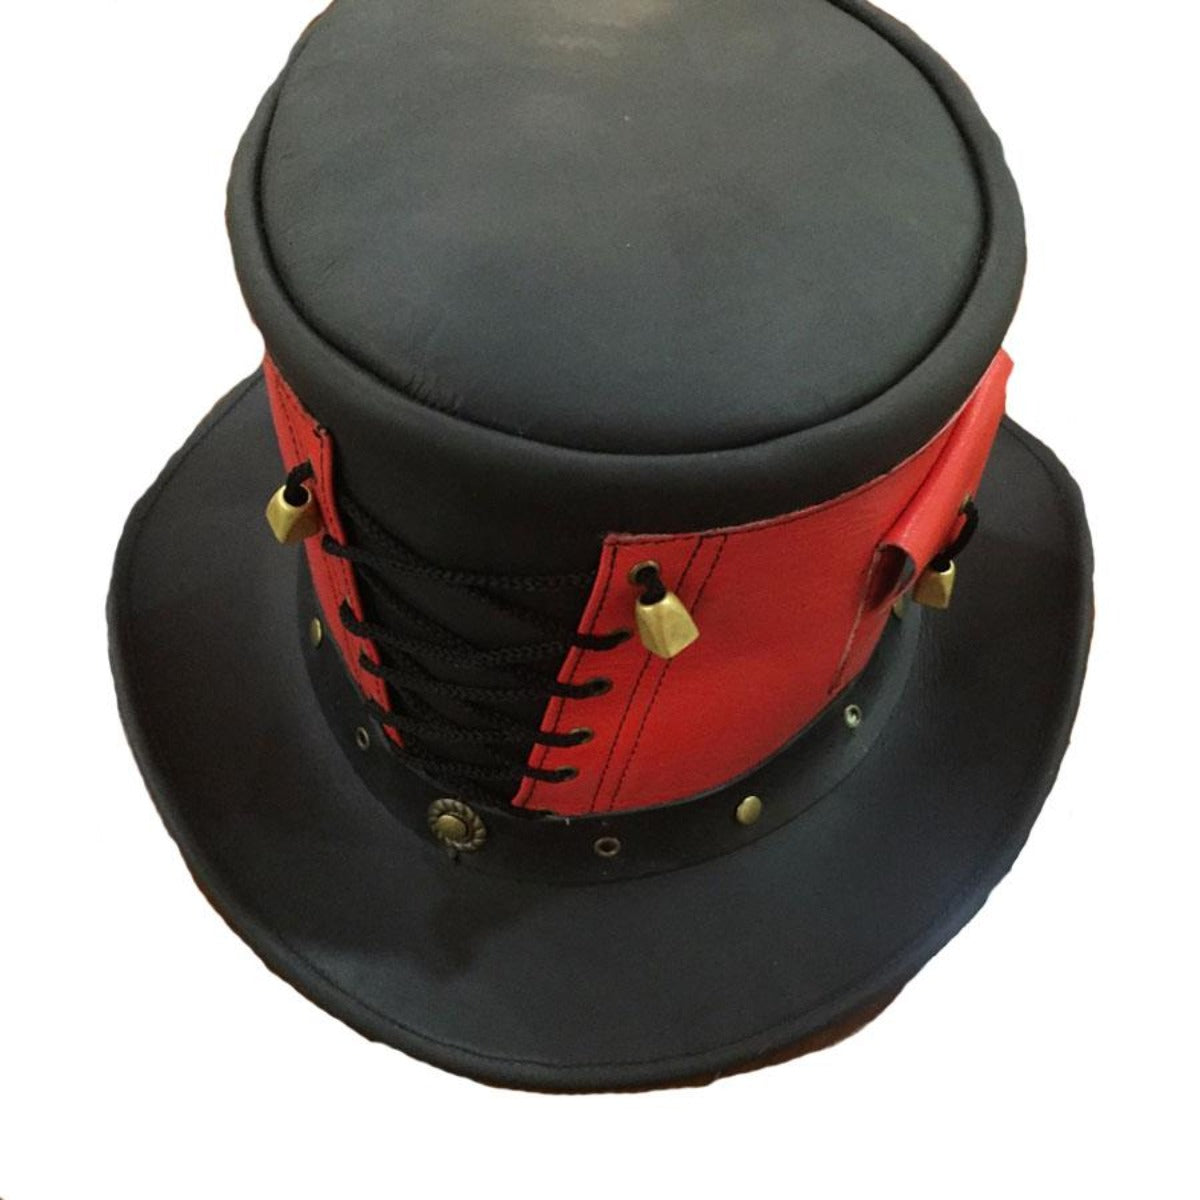 Vance Leather Red Rover Top Hat - Premium Leather